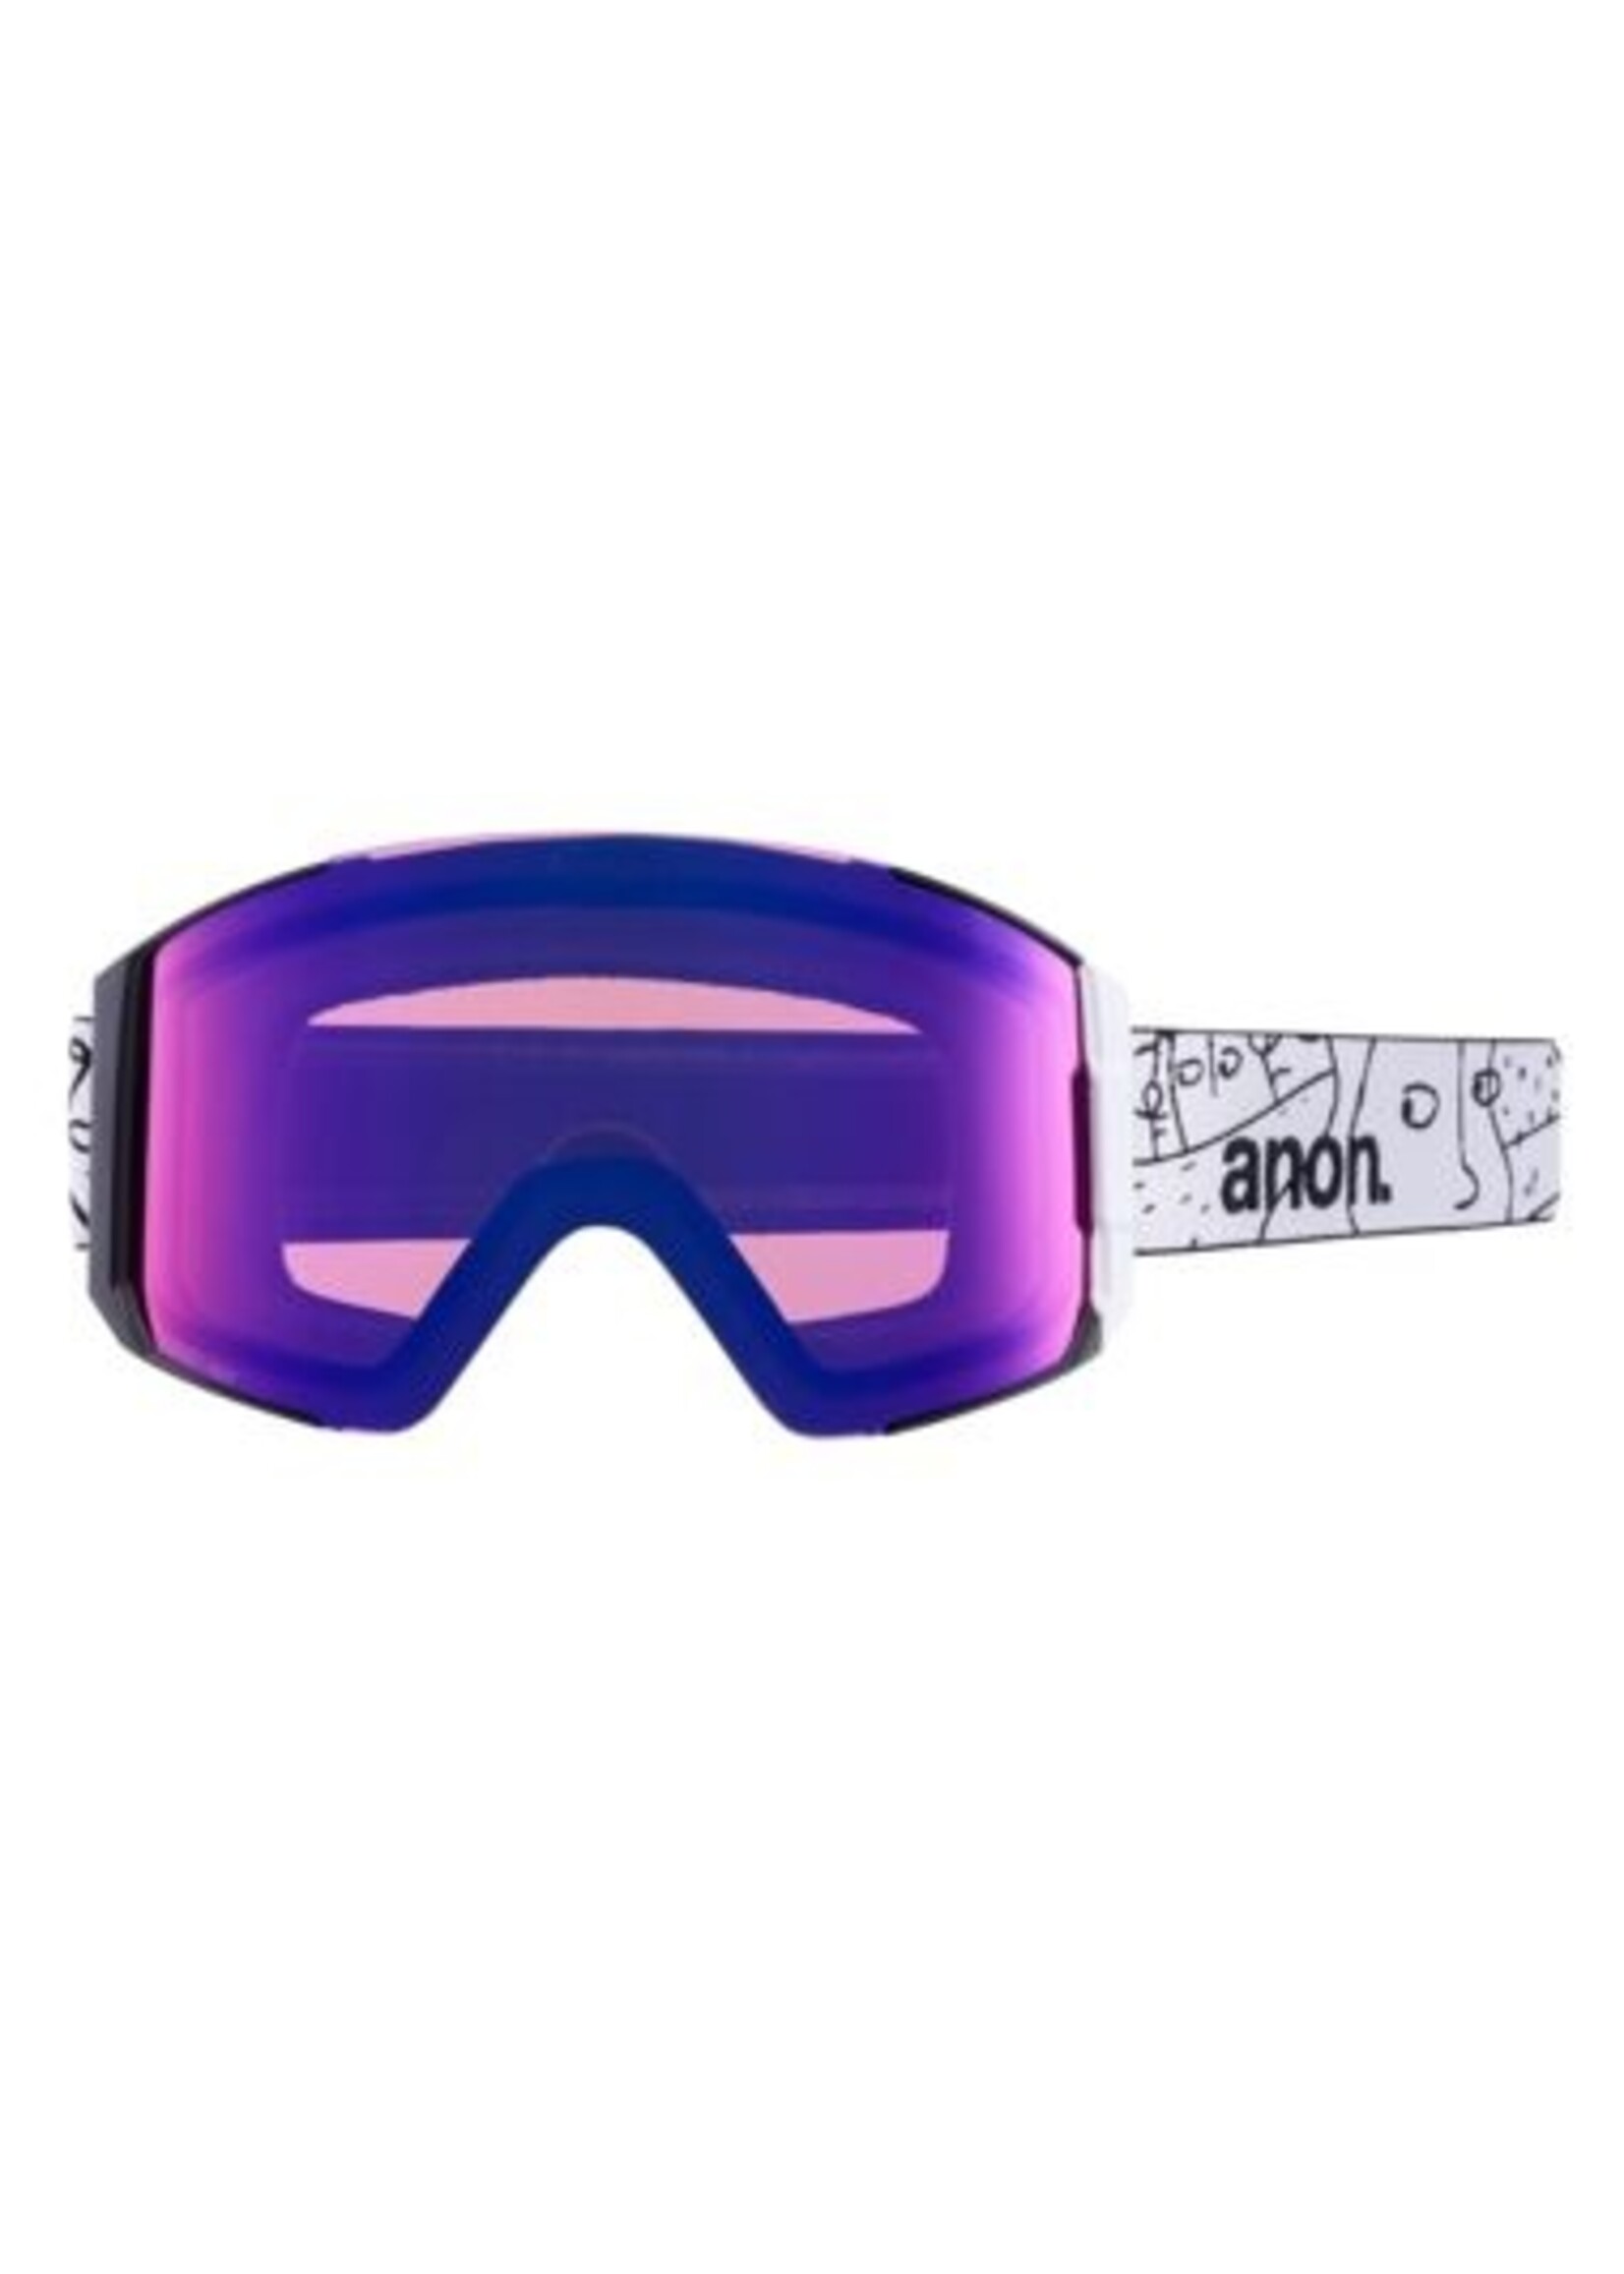 Sync Goggles - - Pathfinder of WV